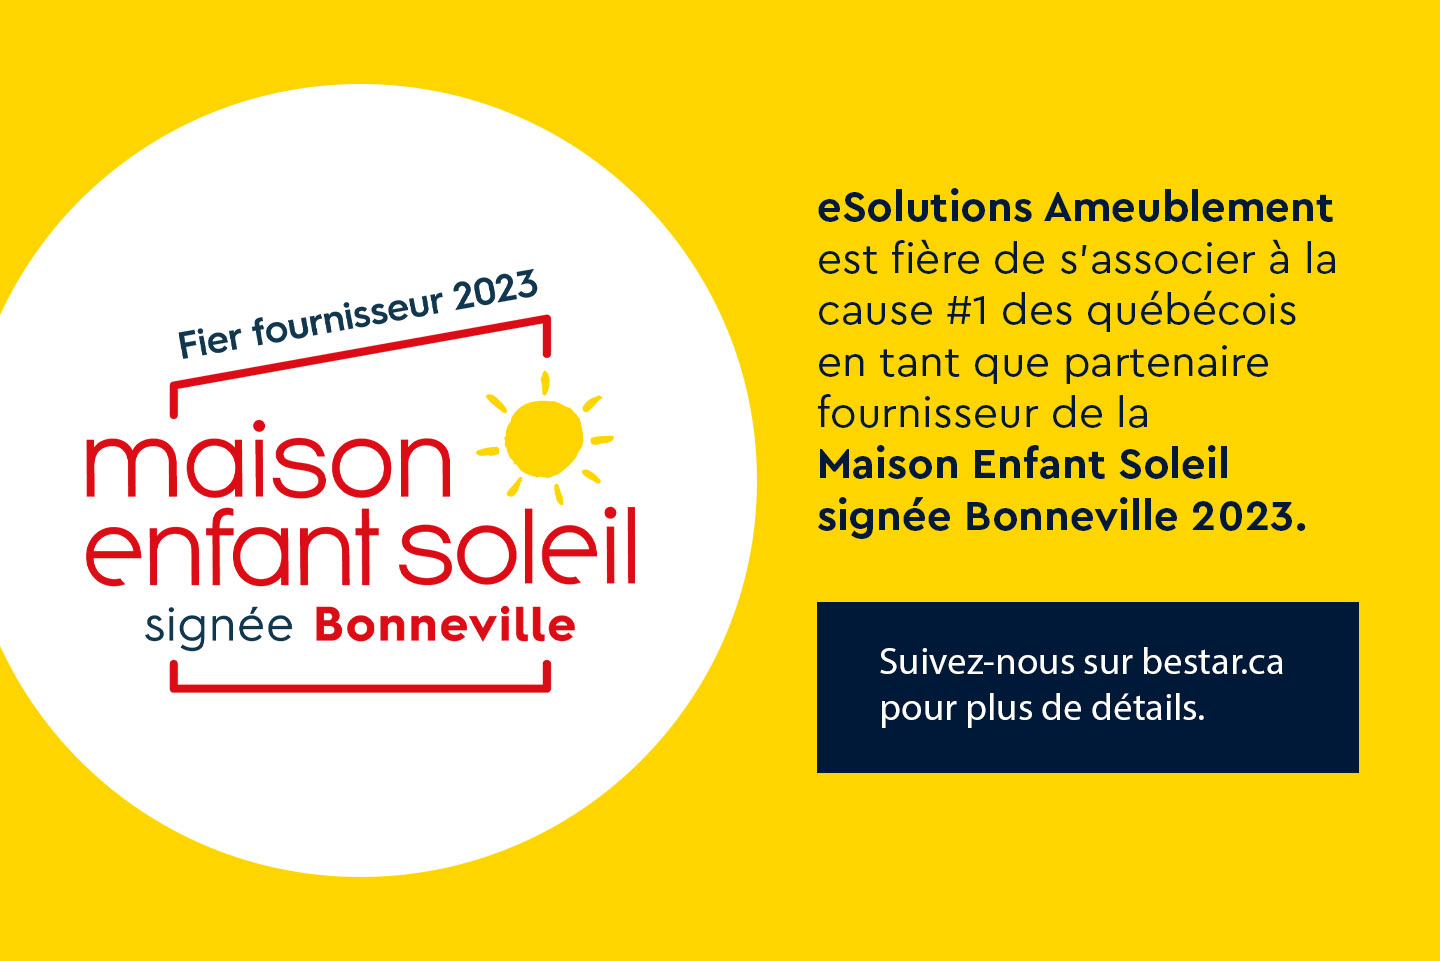 eSolutions is proud to be associated with Maison Enfant Soleil